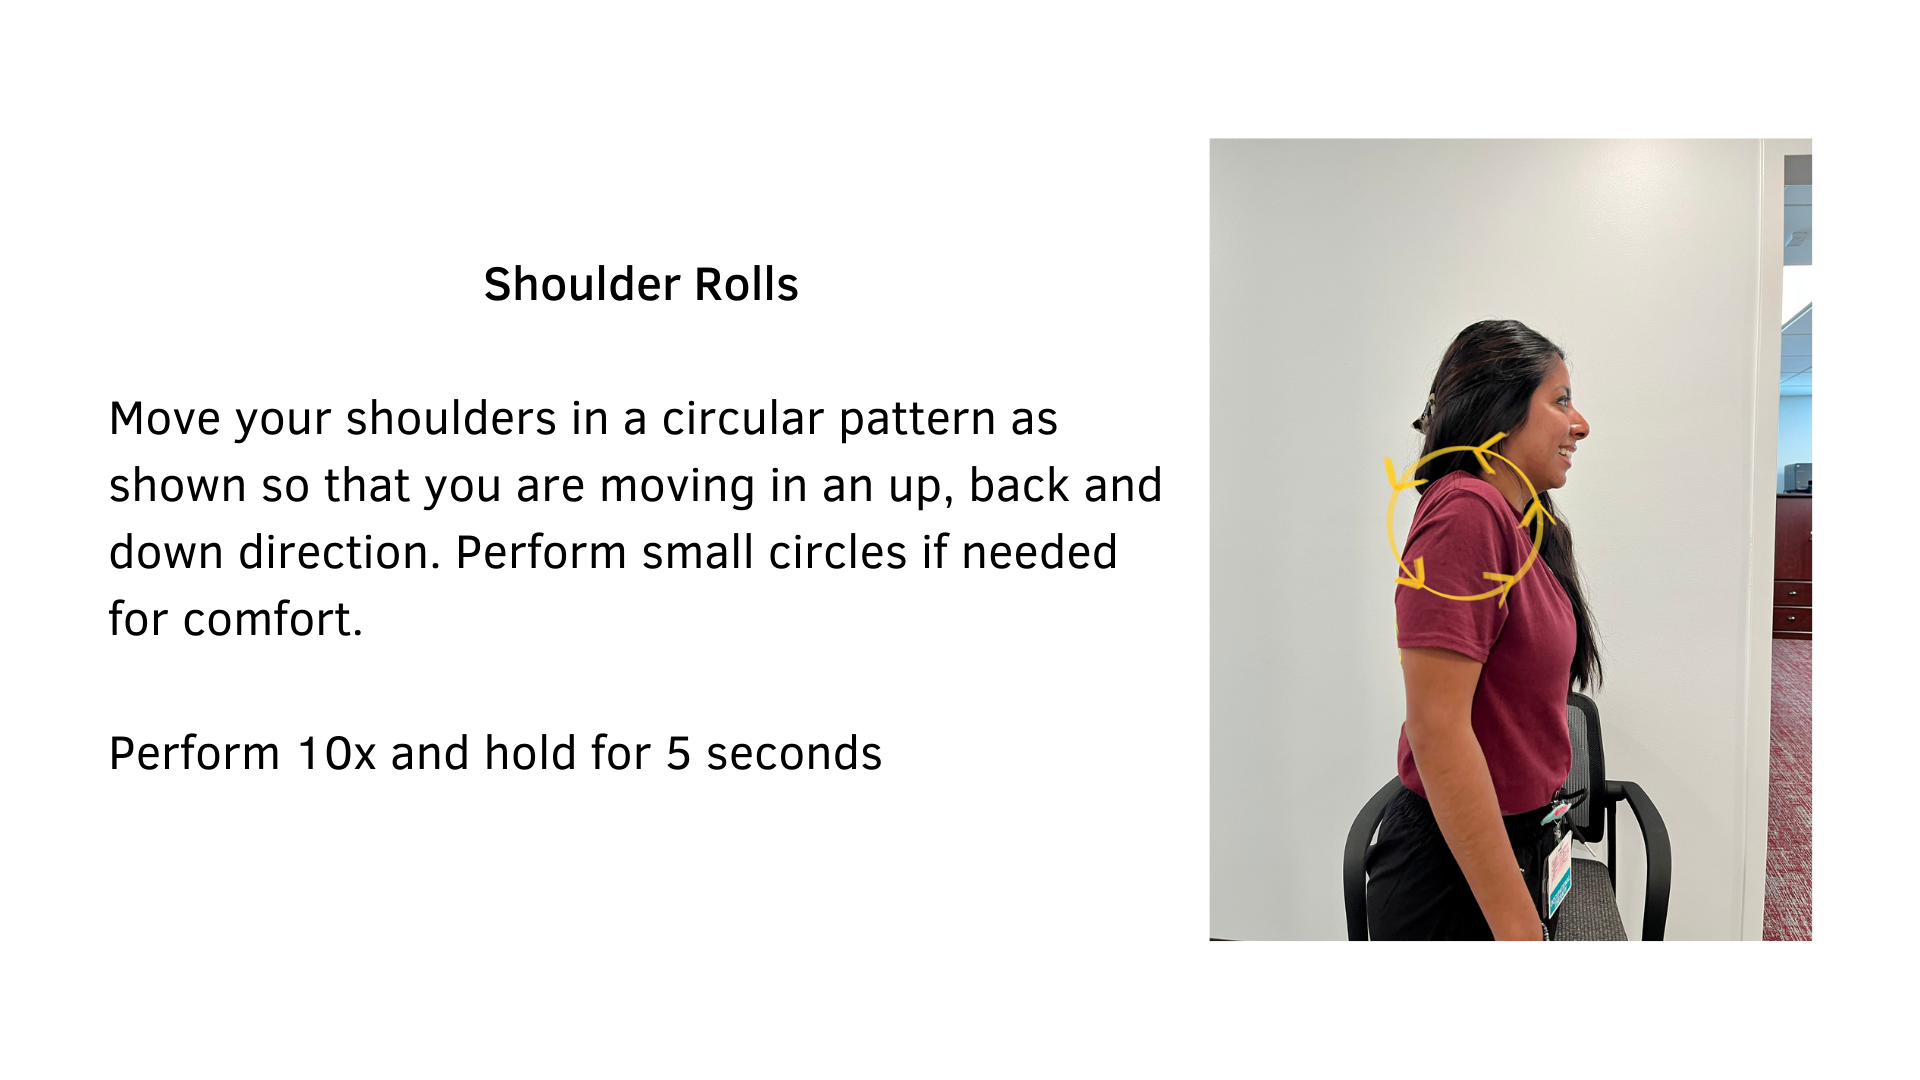 Black text on a white background that reads, "Shoulder Rolls: Move your shoulders in a circular pattern as shown so that you are moving in an up, back and down direction. Perform small circles if needed for comfort. Perform 10x and hold for 5 seconds". A picture of a woman from the side demonstrating the stretch is featured, with yellow arrows in a circle around the shoulder area to direct motion.